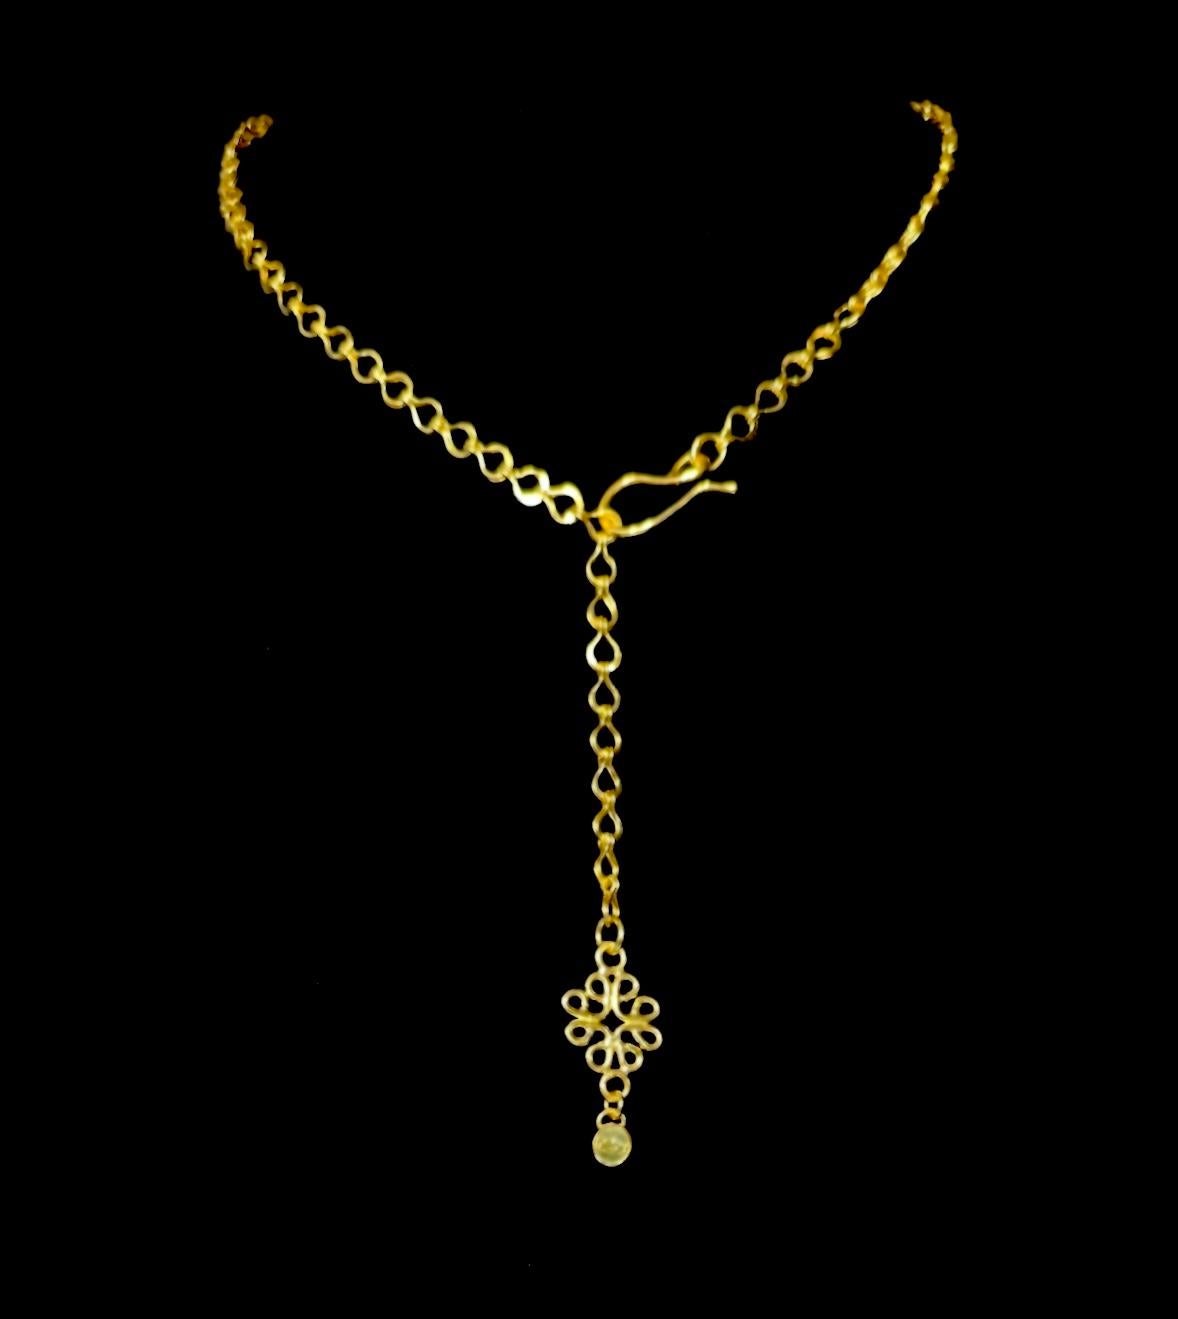 -Please allow 2-4 weeks for this product to be made.
-22K Gold 
-Handmade
-Available in 16, 18 and 20 inch. 
-Price is for 16 inch chain.
-Stamped with the Nebu logo

This necklace is Handmade using an ancient technique of chain weaving that was